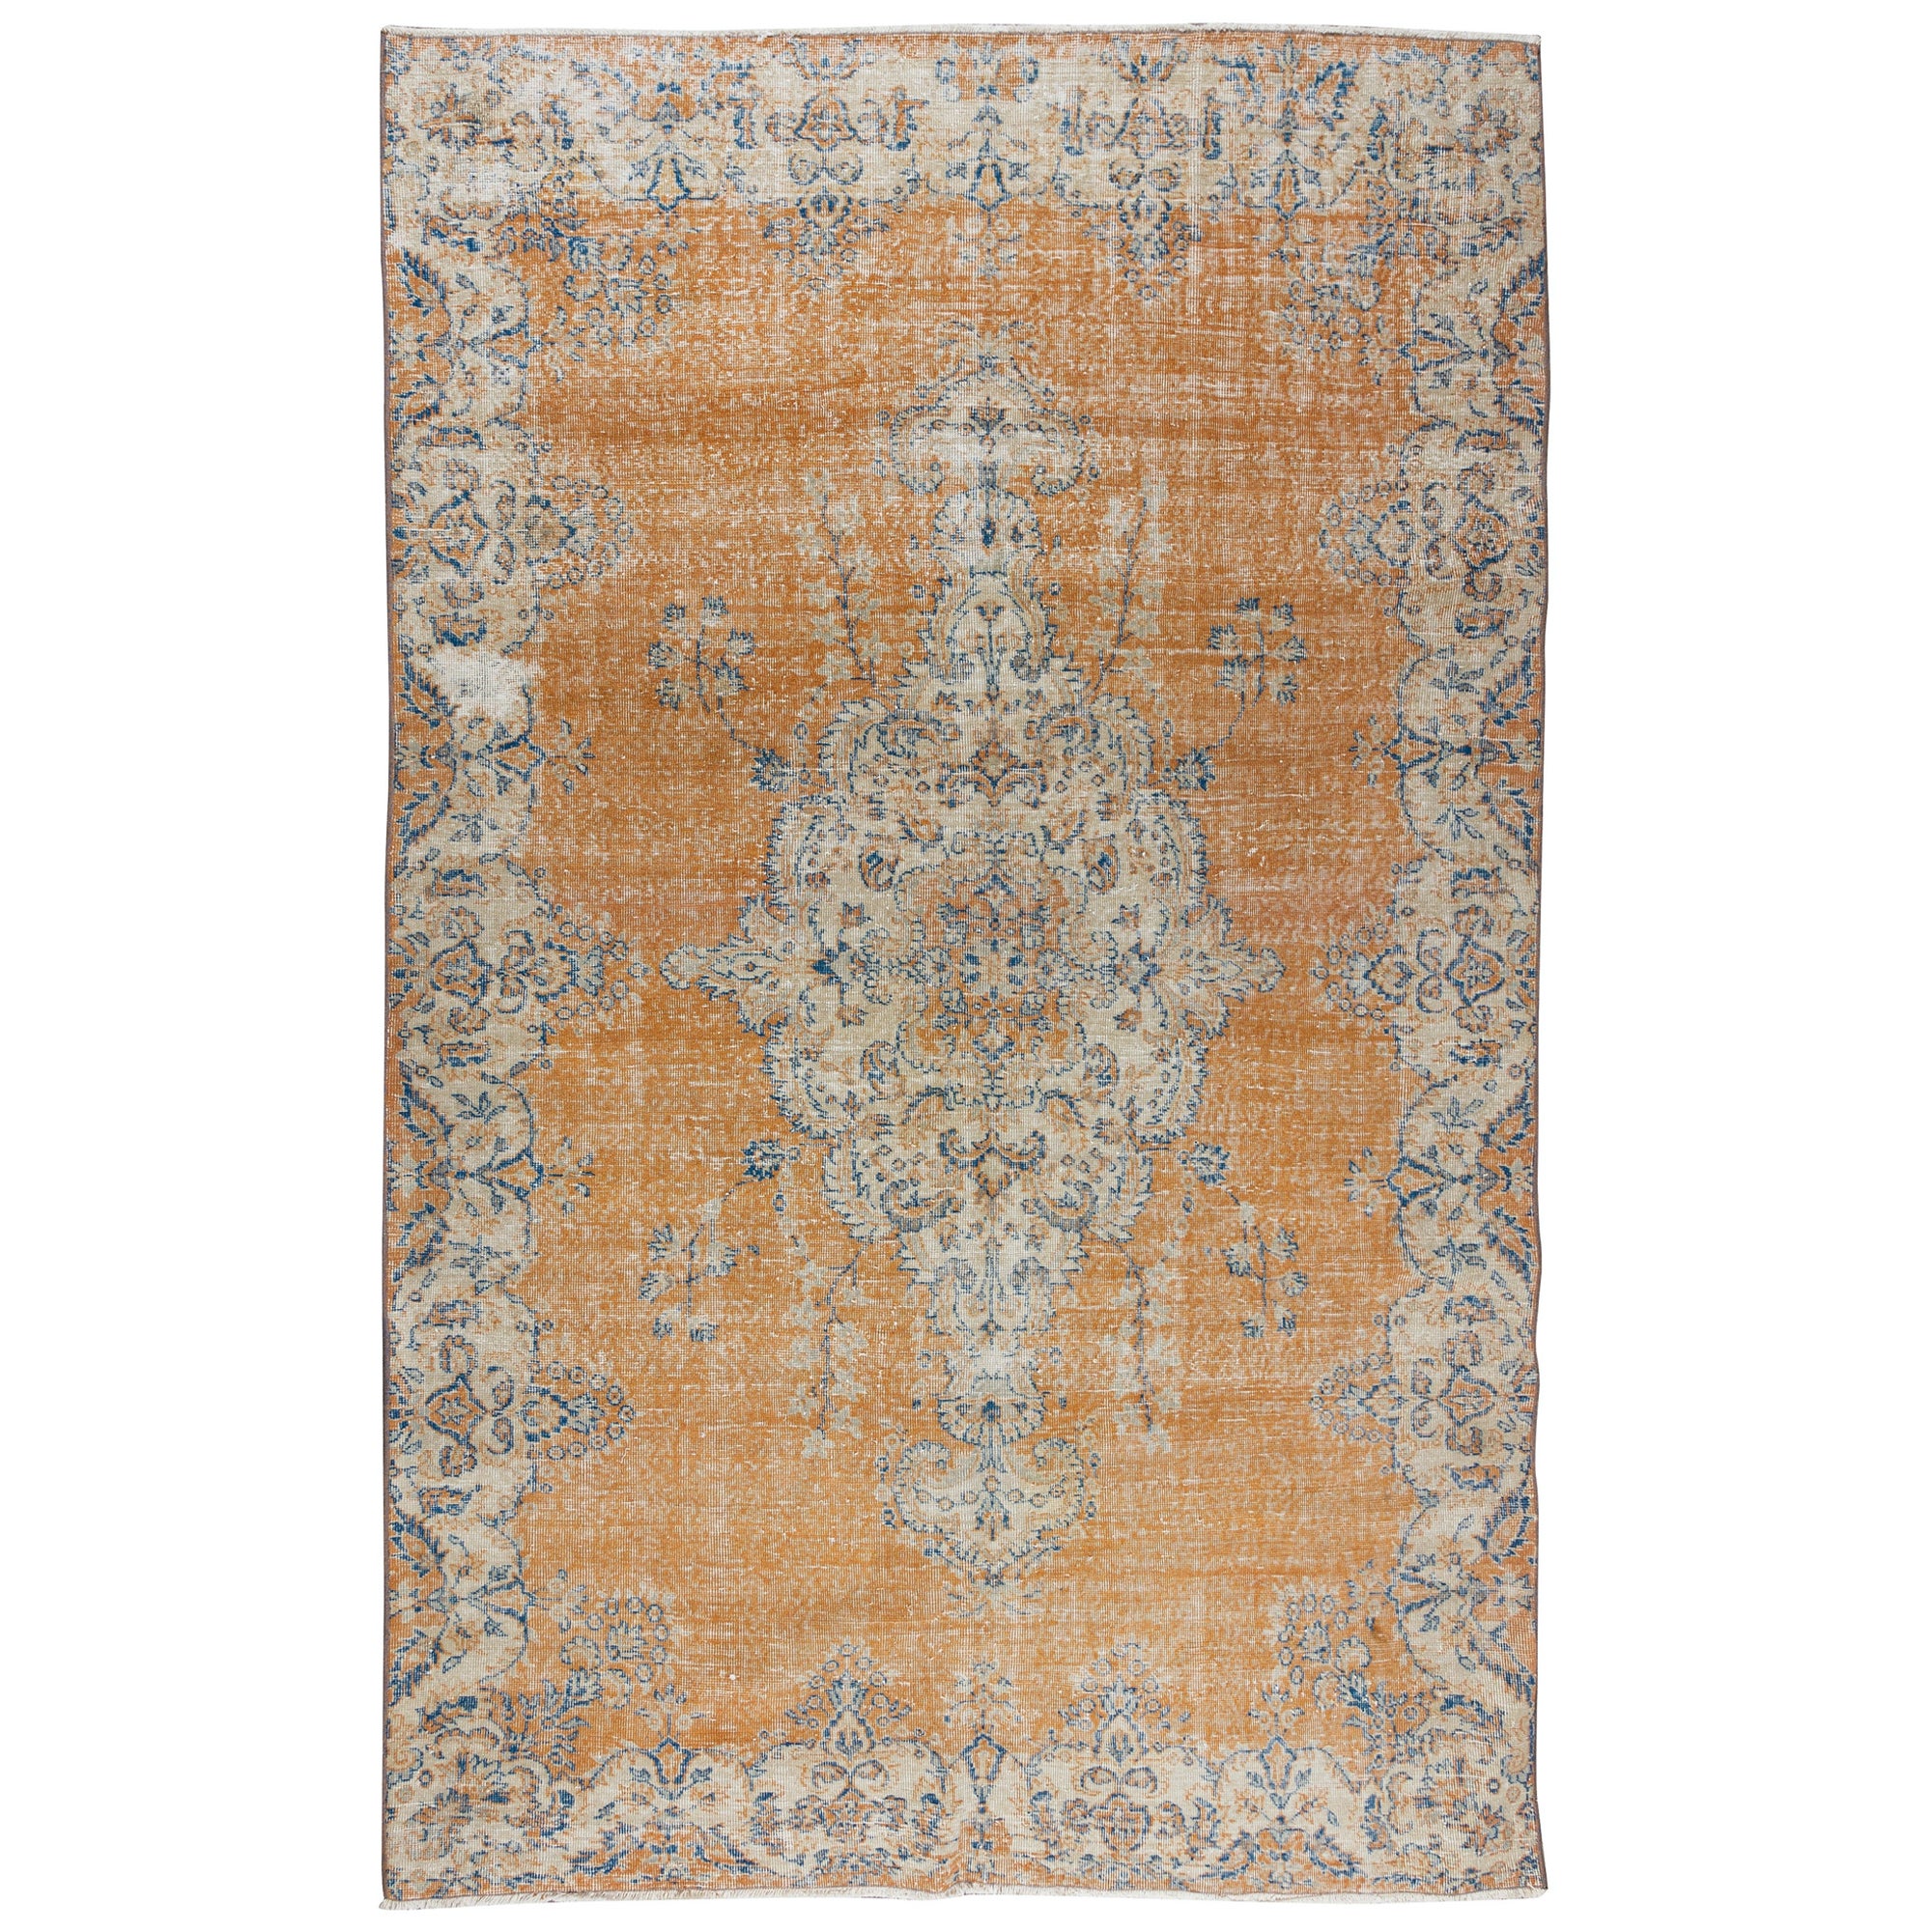 6.8x10.5 Ft Hand Knotted Vintage Turkish Rug in Orange, Navy Blue & Cream Colors For Sale